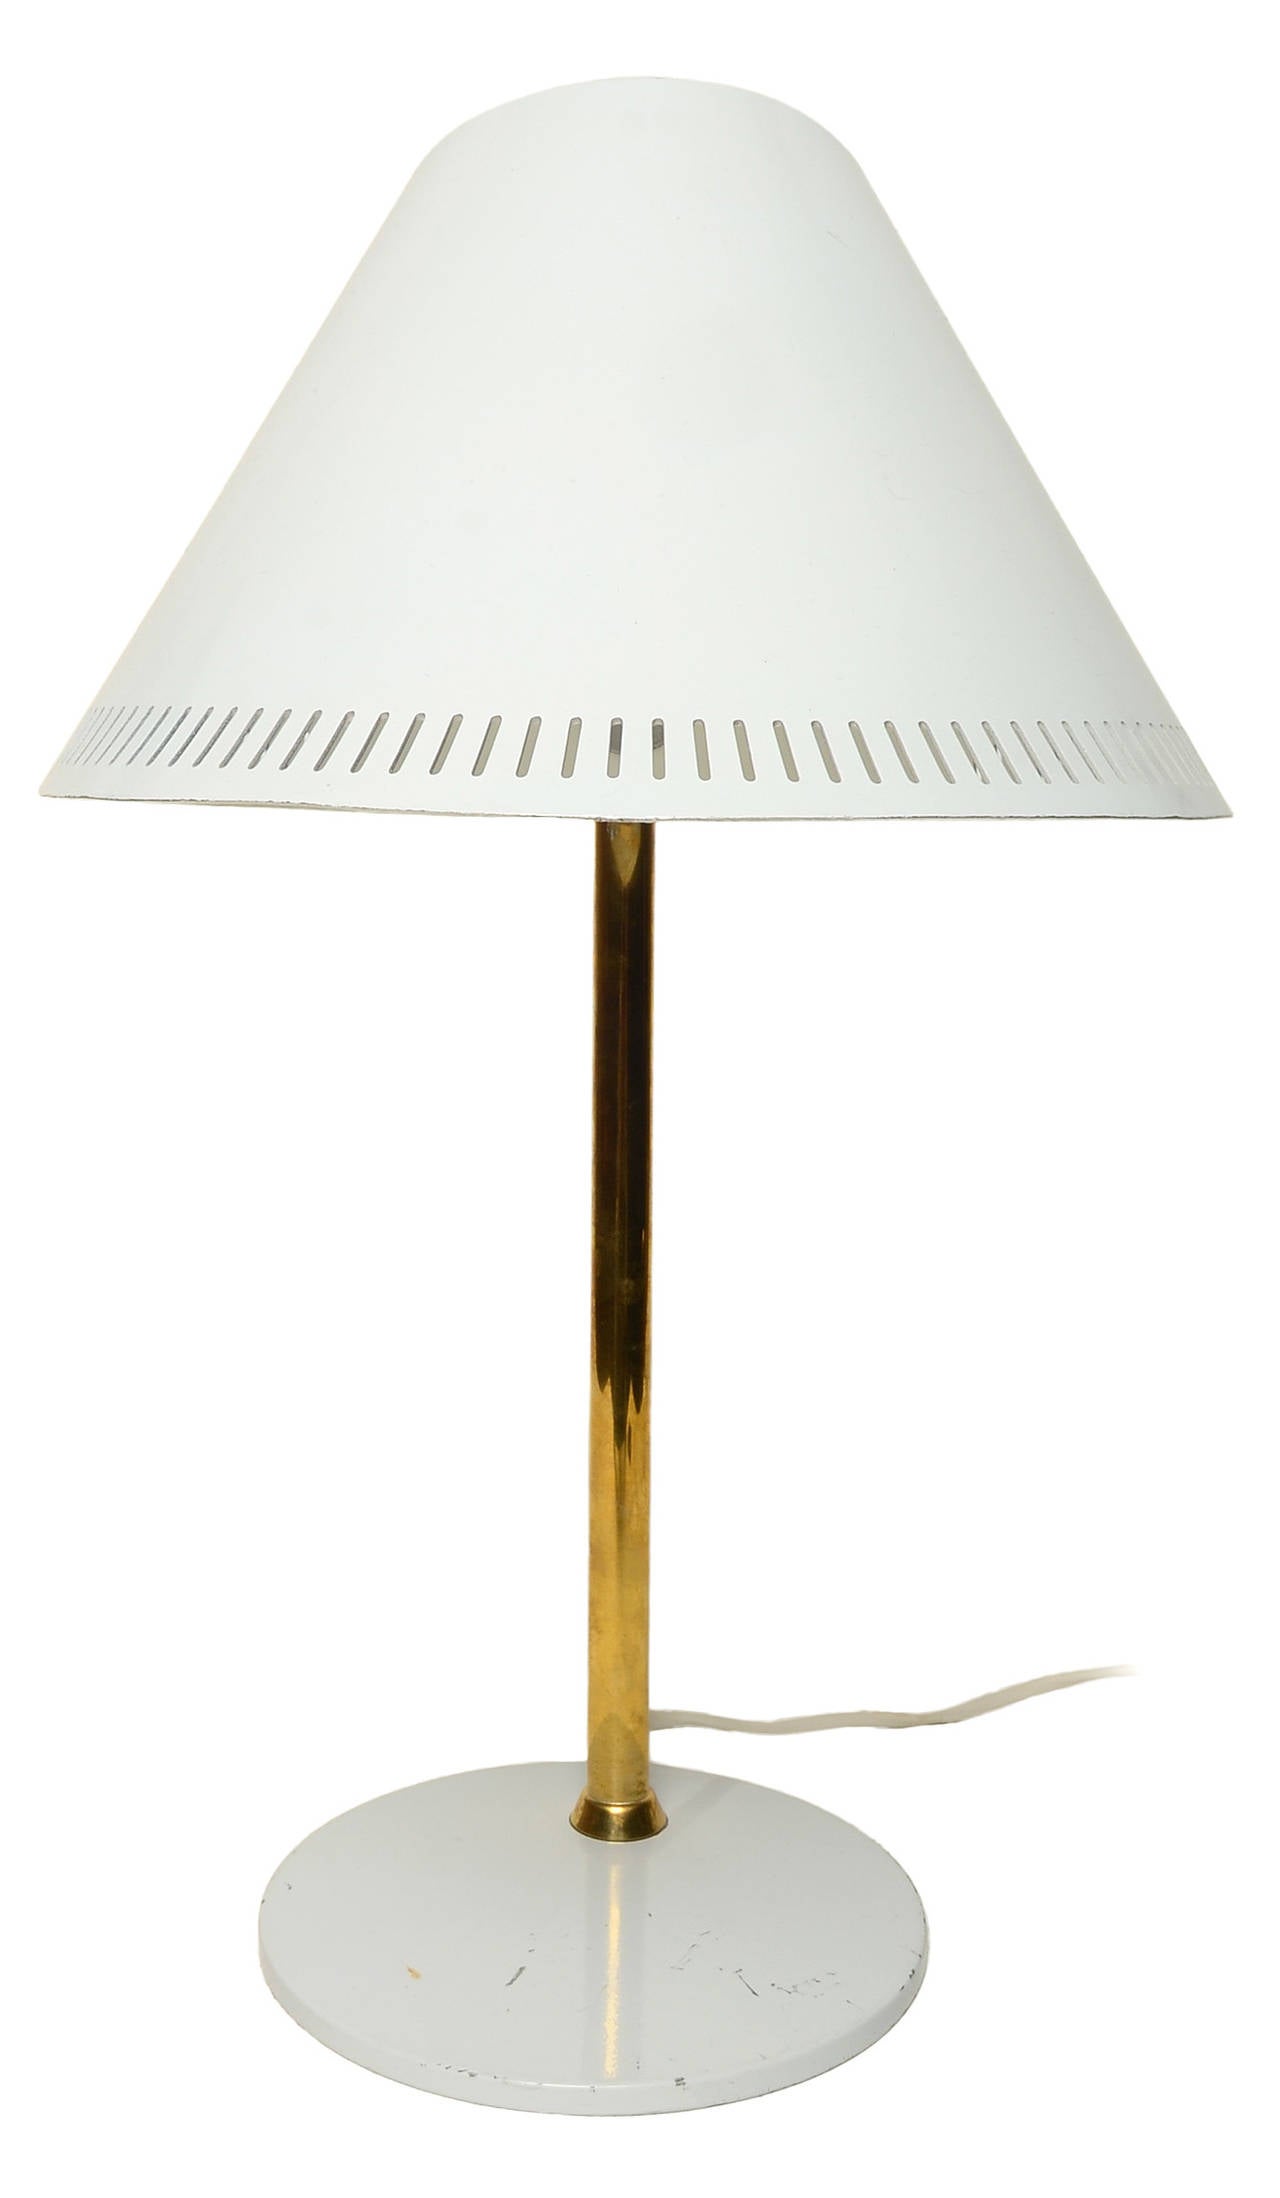 An adjustable table lamp by Paavo Tynell for Idman, circa1950

This example retains it's original enameled white shade with a solid brass upright and adjustable thumbscrew.

Stamped to base.